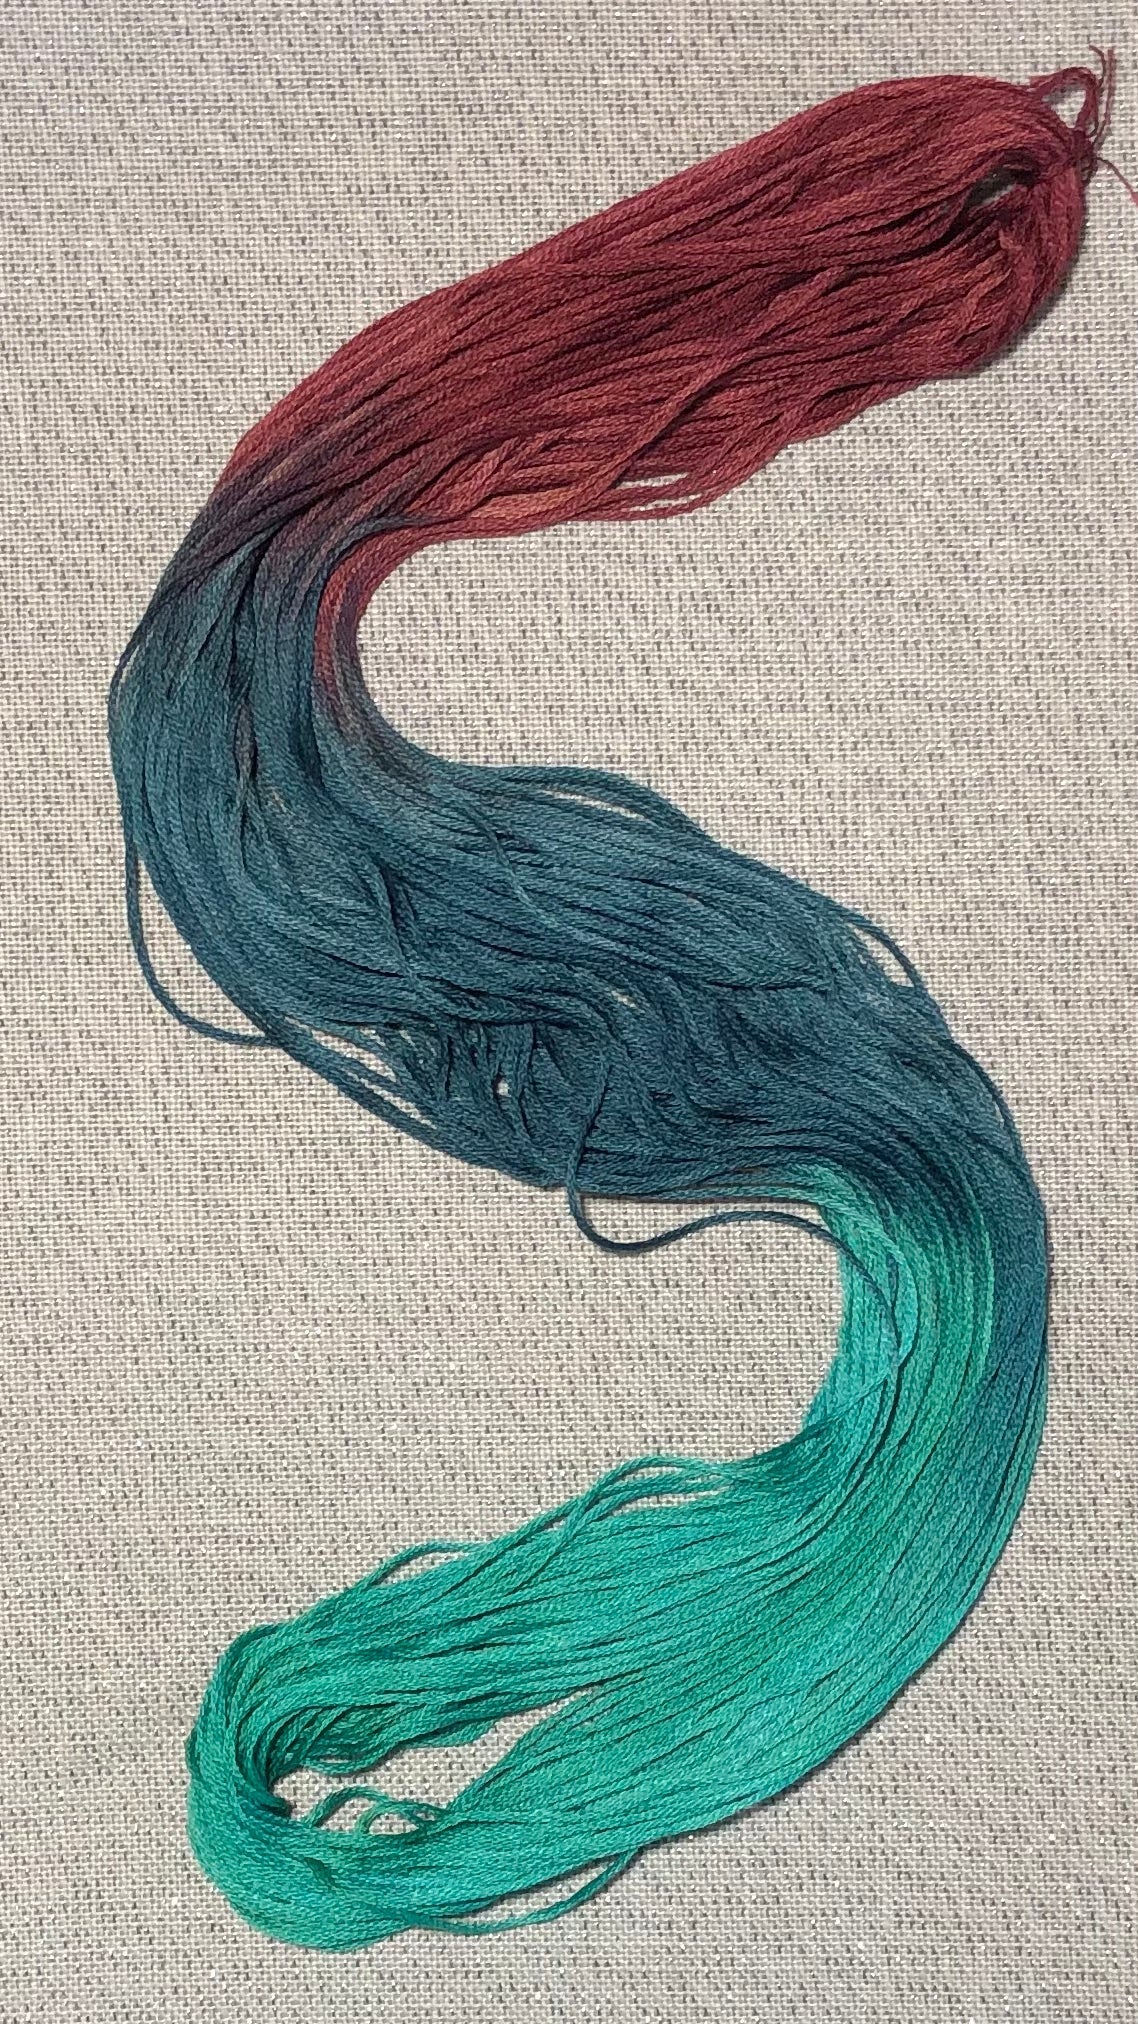 Cotton hand dyed floss - Hysteria - Dyeing for Cross Stitch